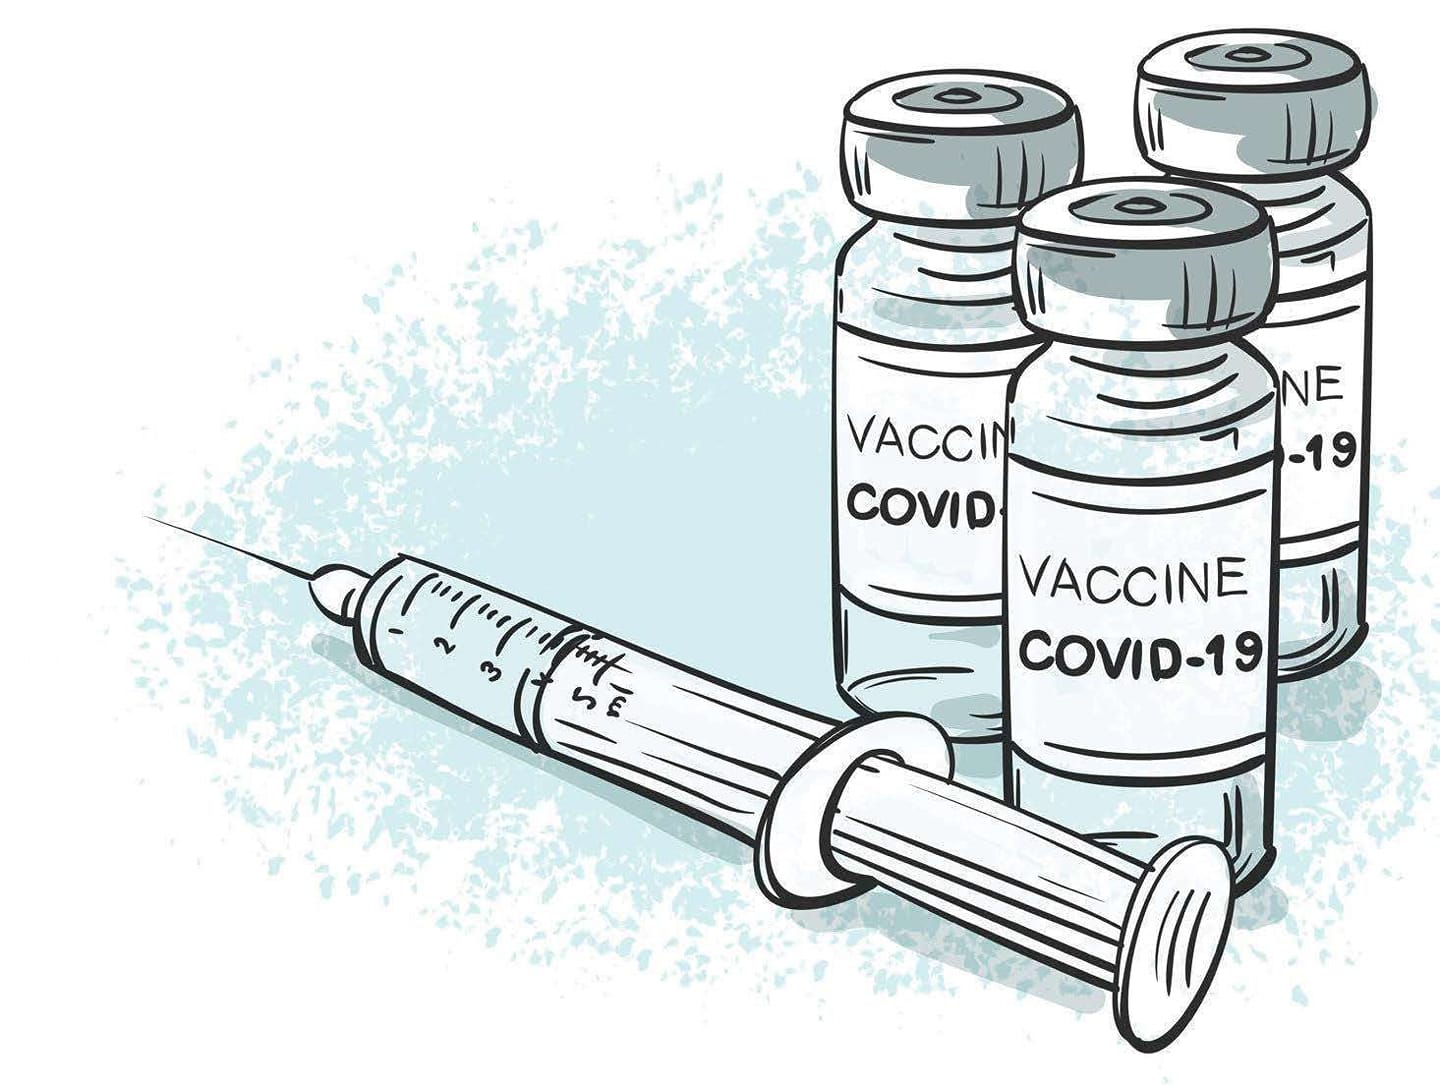 VACCINATION COVID-19 ET GRIPPE